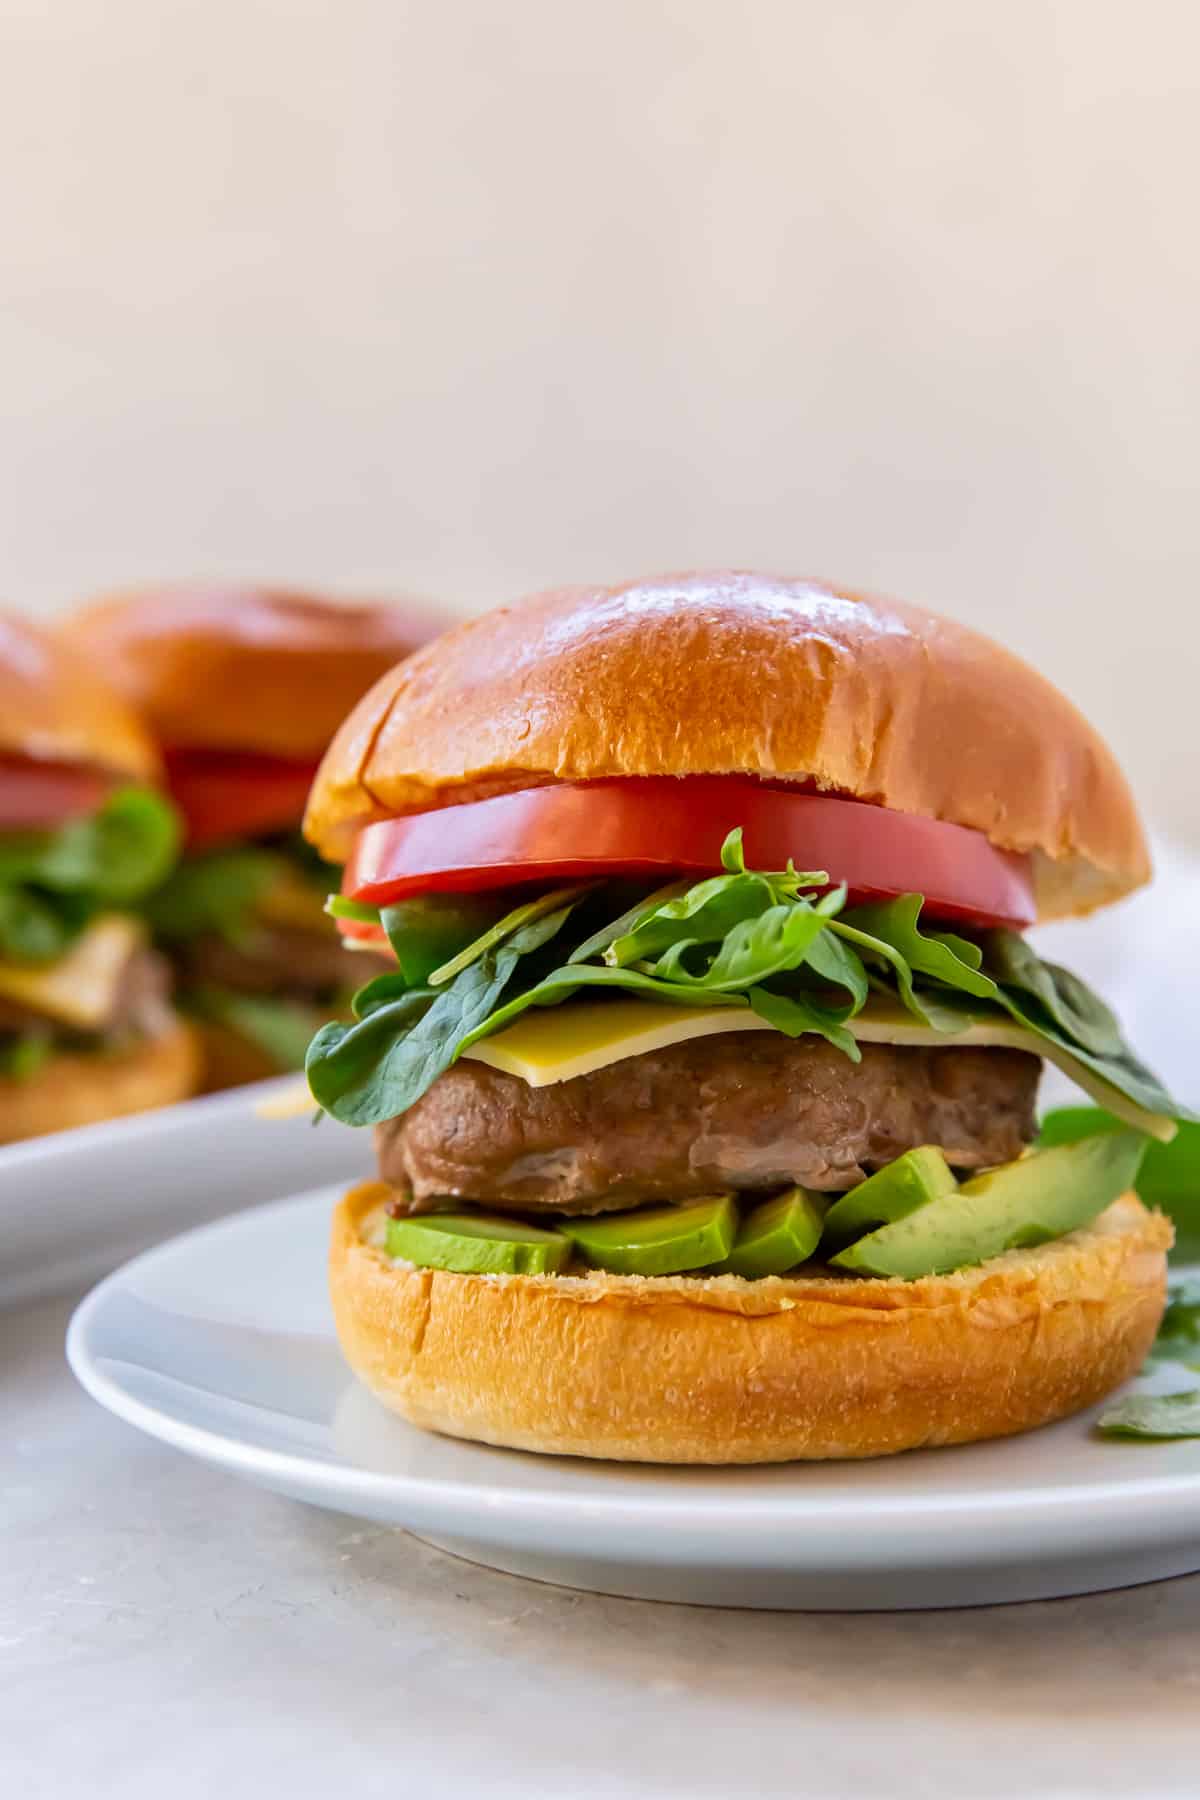 A turkey burger with tomato, spinach, and avocado on a white plate.